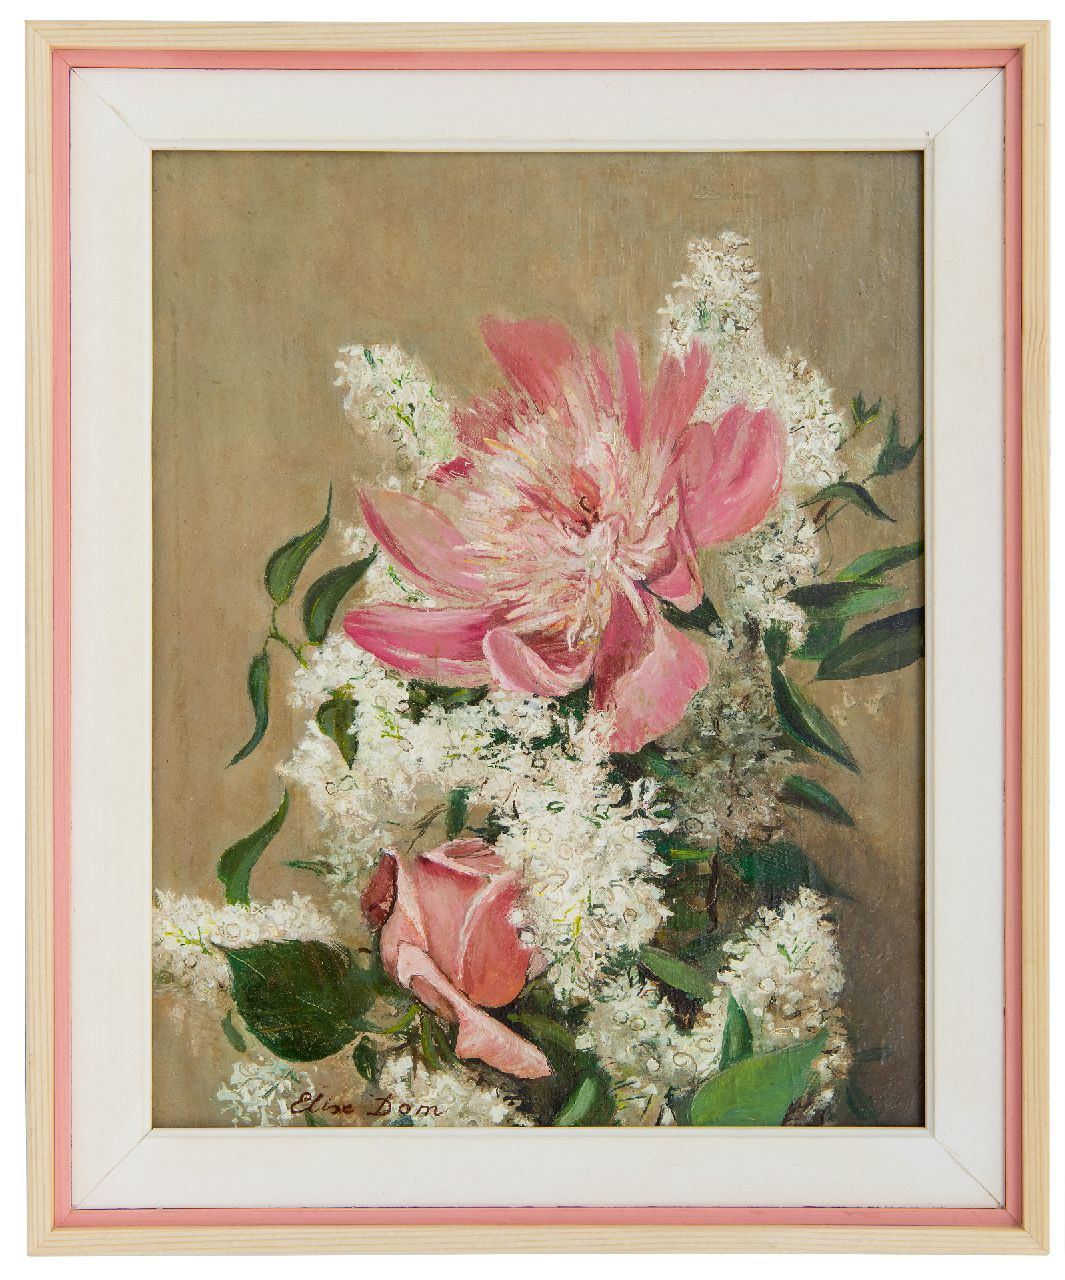 Dom E.L.  | 'Elise' Louise Dom | Paintings offered for sale | Flower still life, oil on panel 21.0 x 28.0 cm